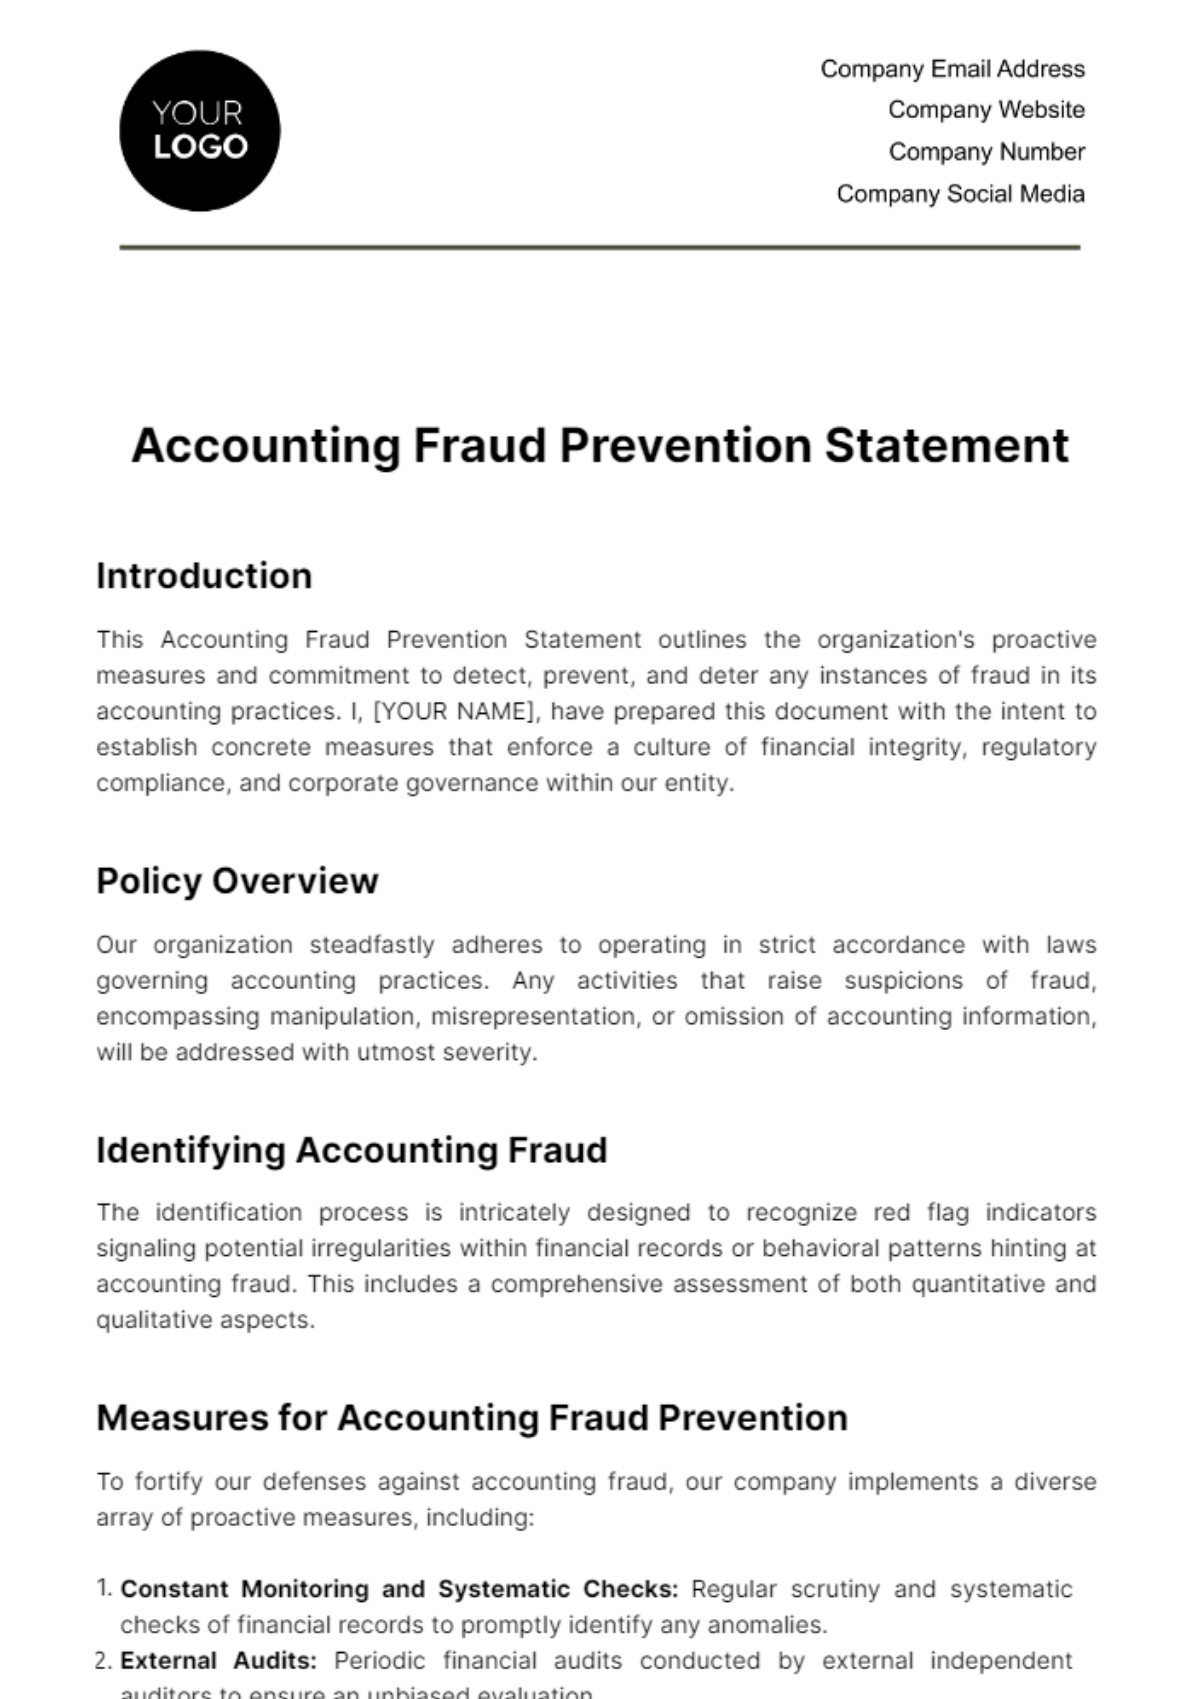 Free Accounting Fraud Prevention Statement Template